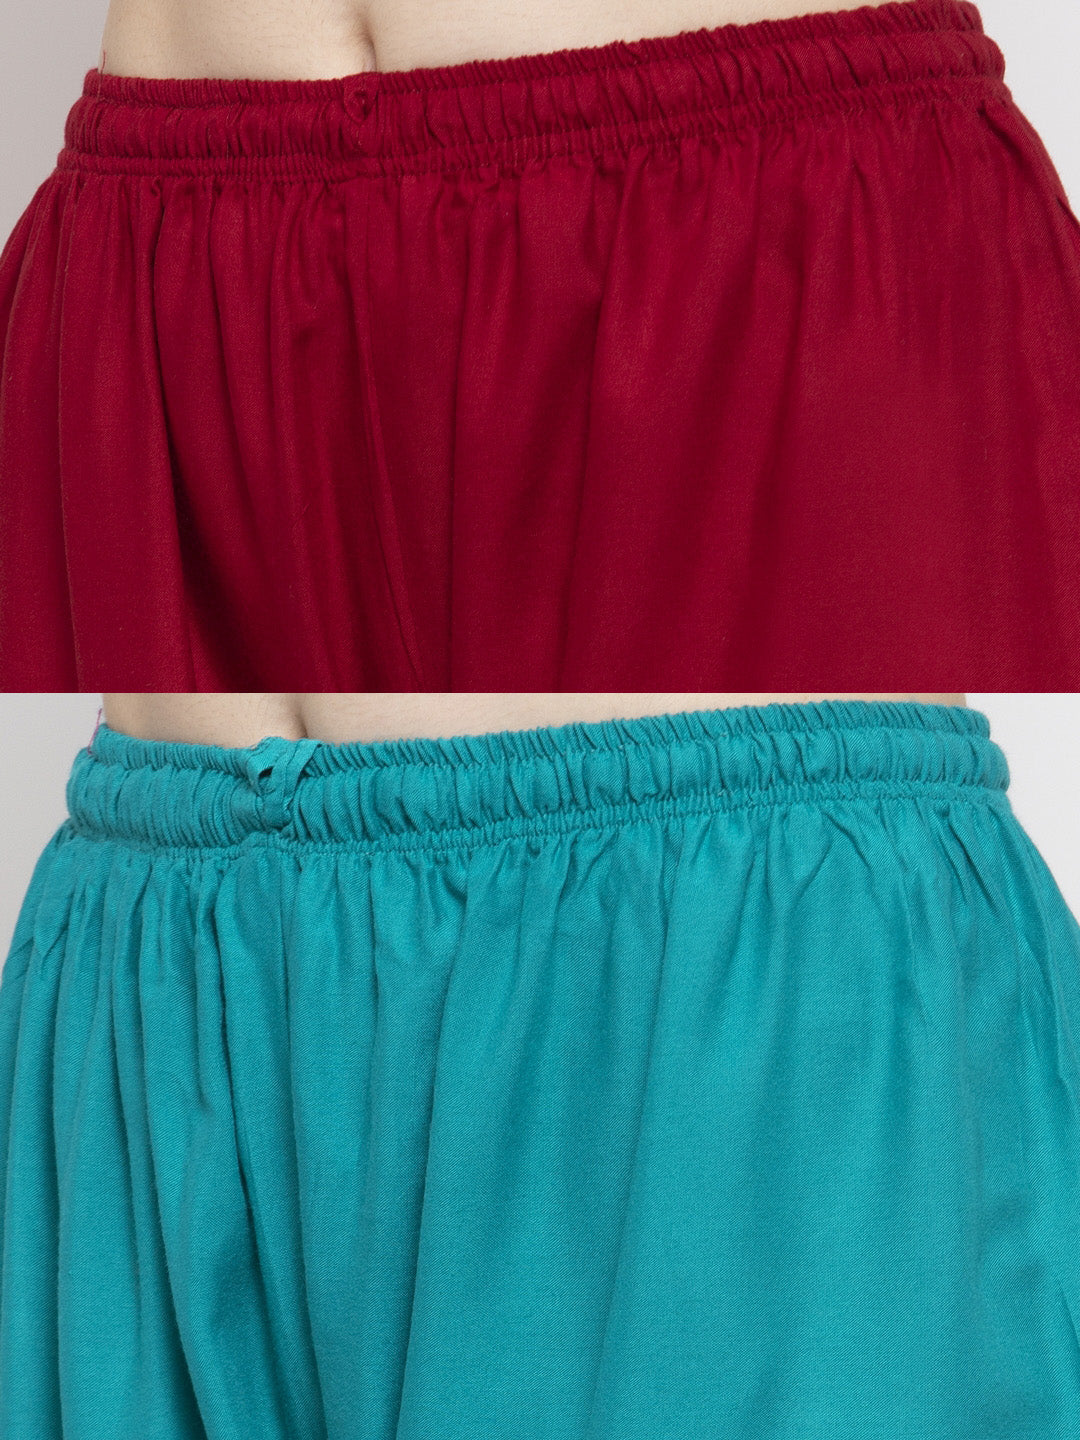 Clora Solid Maroon & Turquoise Rayon Palazzo (Pack Of 2)